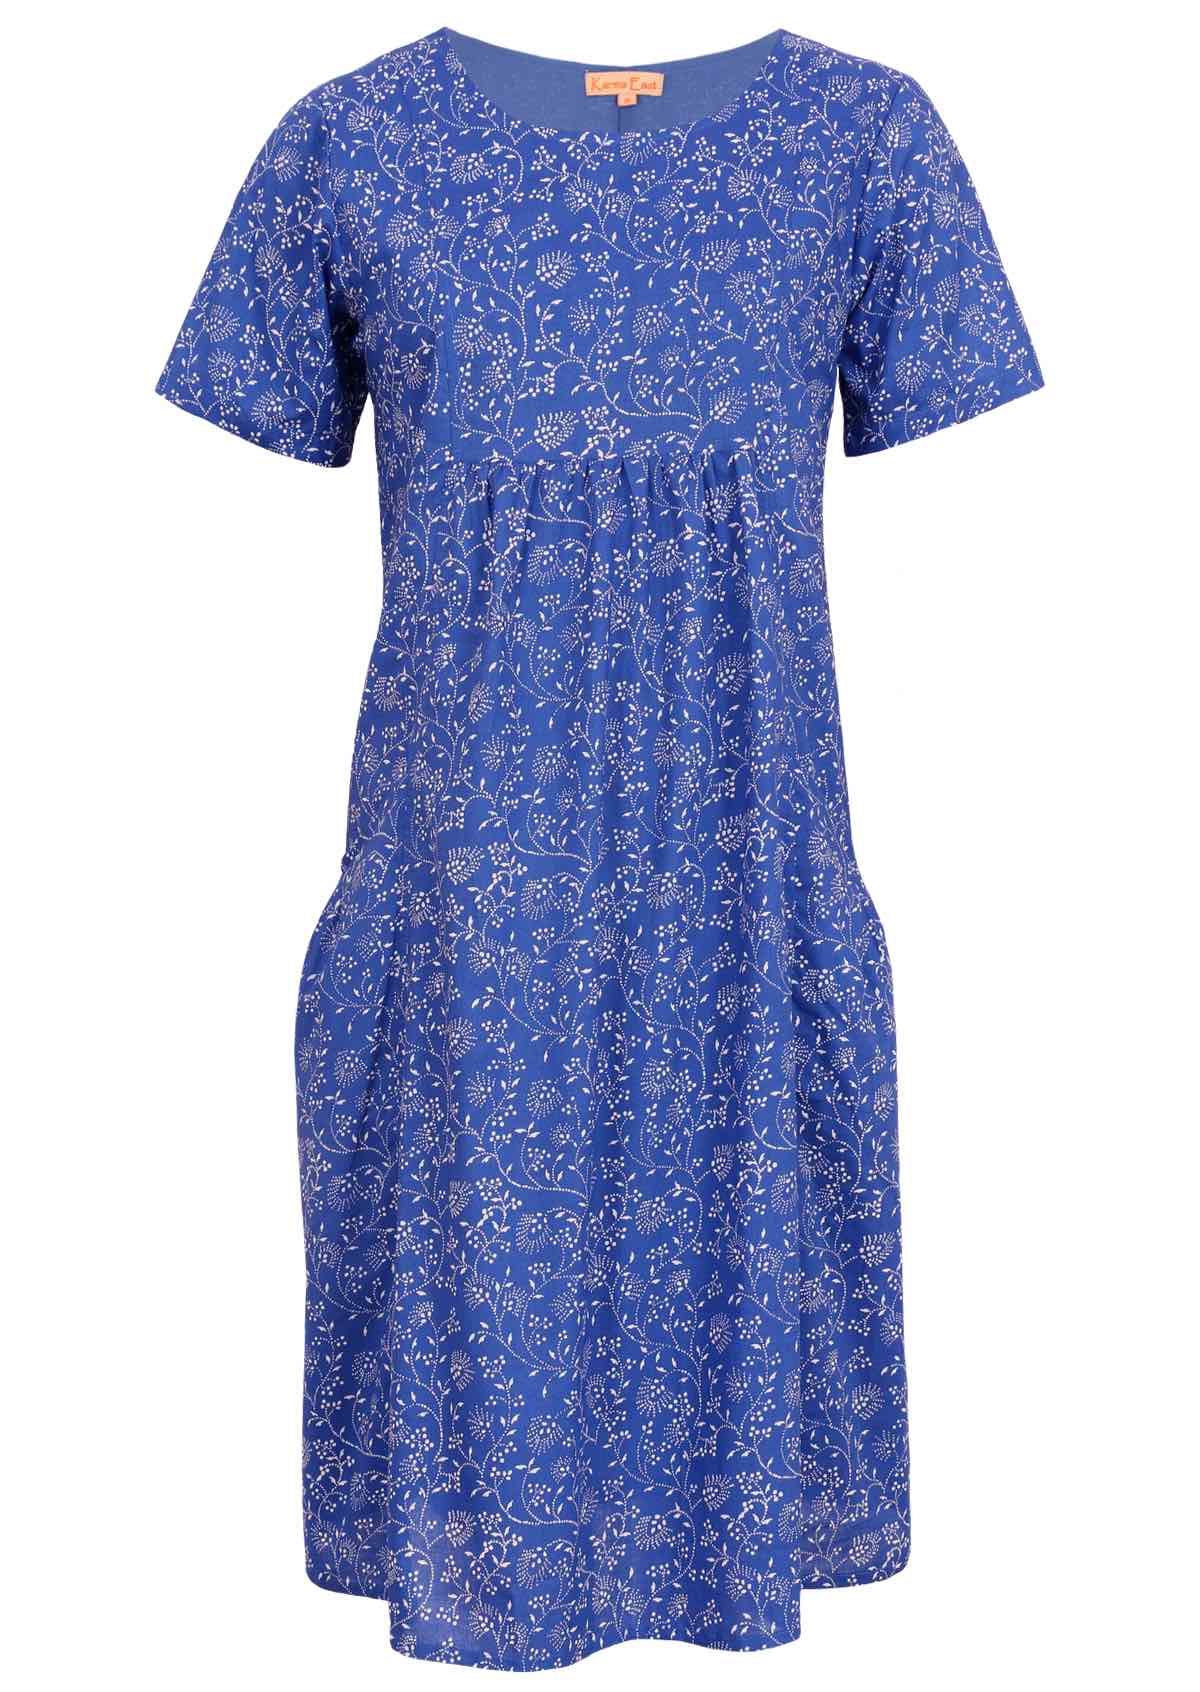 Blue based cotton dress with a delicate floral print. 